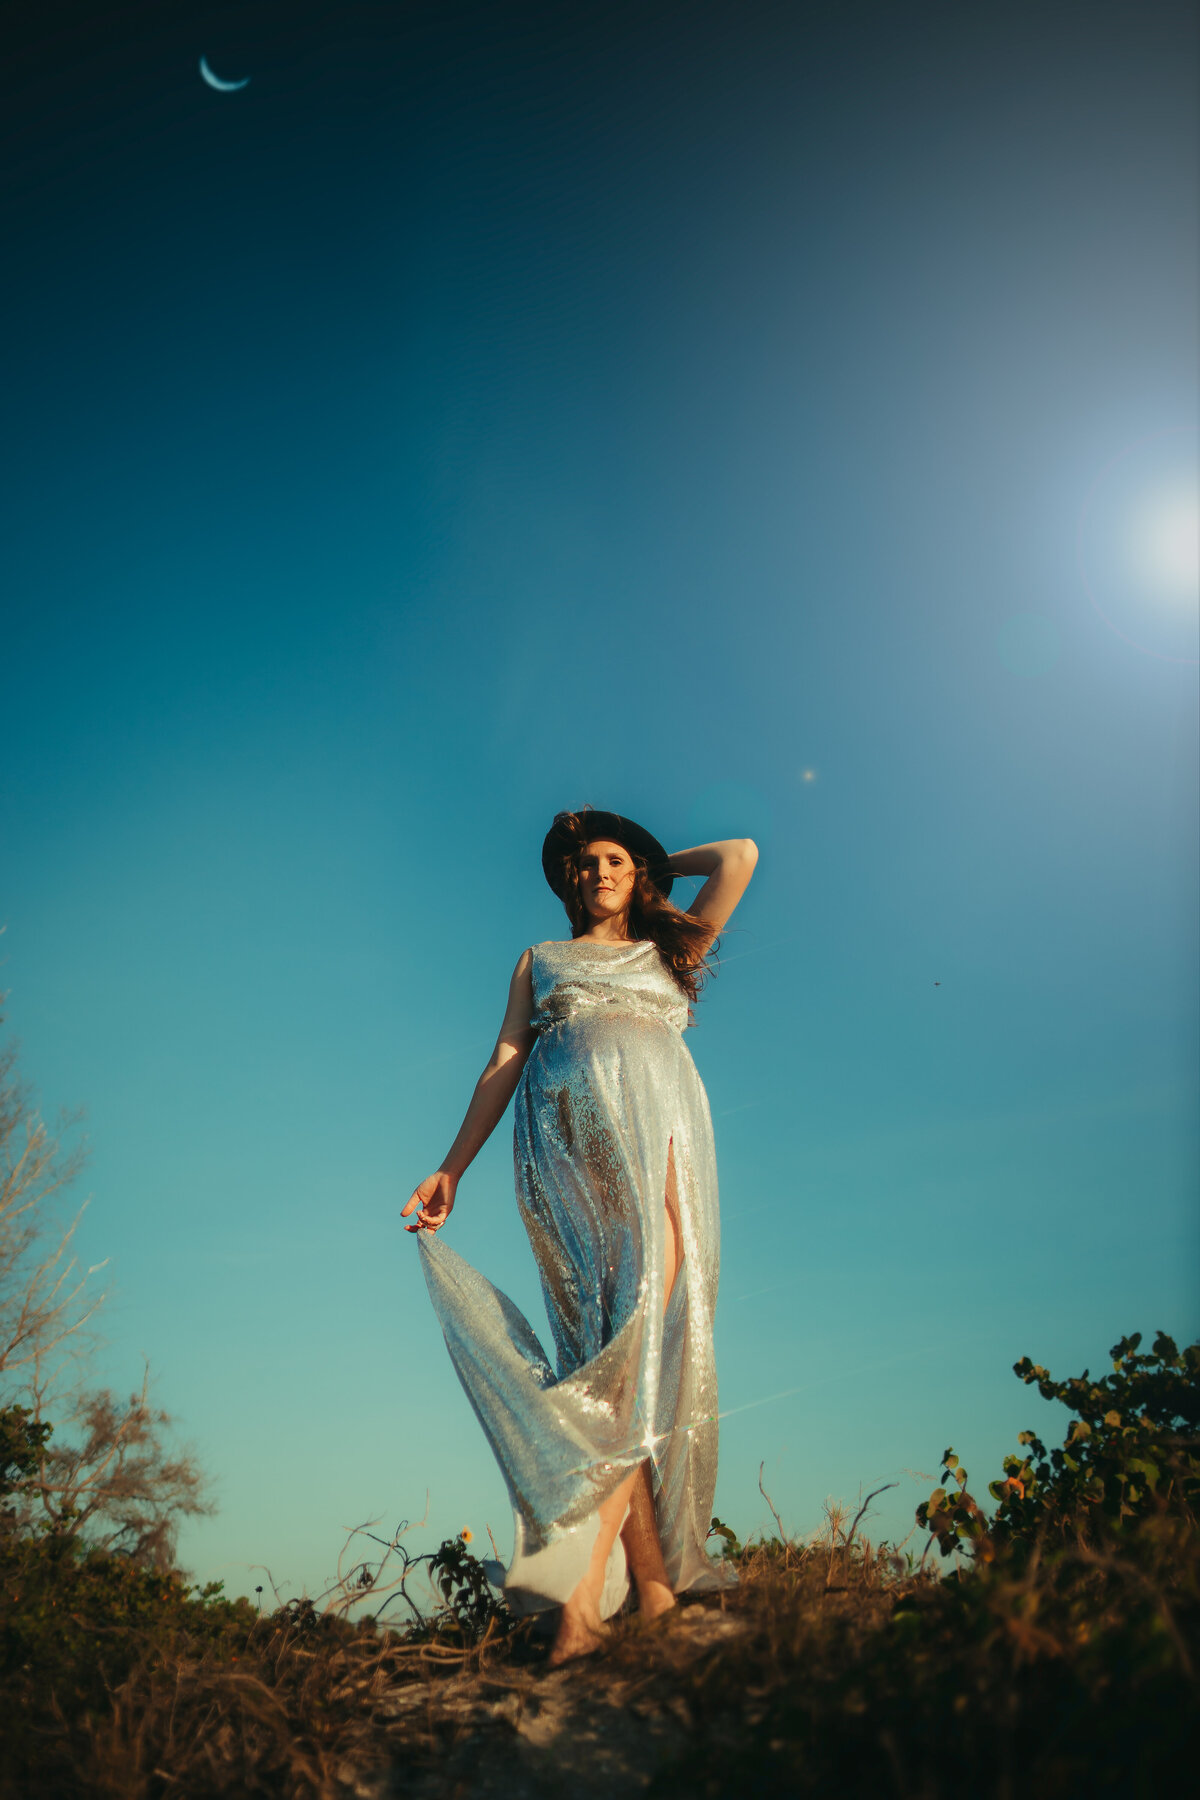 vintage inspired maternity photo session taken at sunset at a beach in st pete fl with a women in a sequin gown